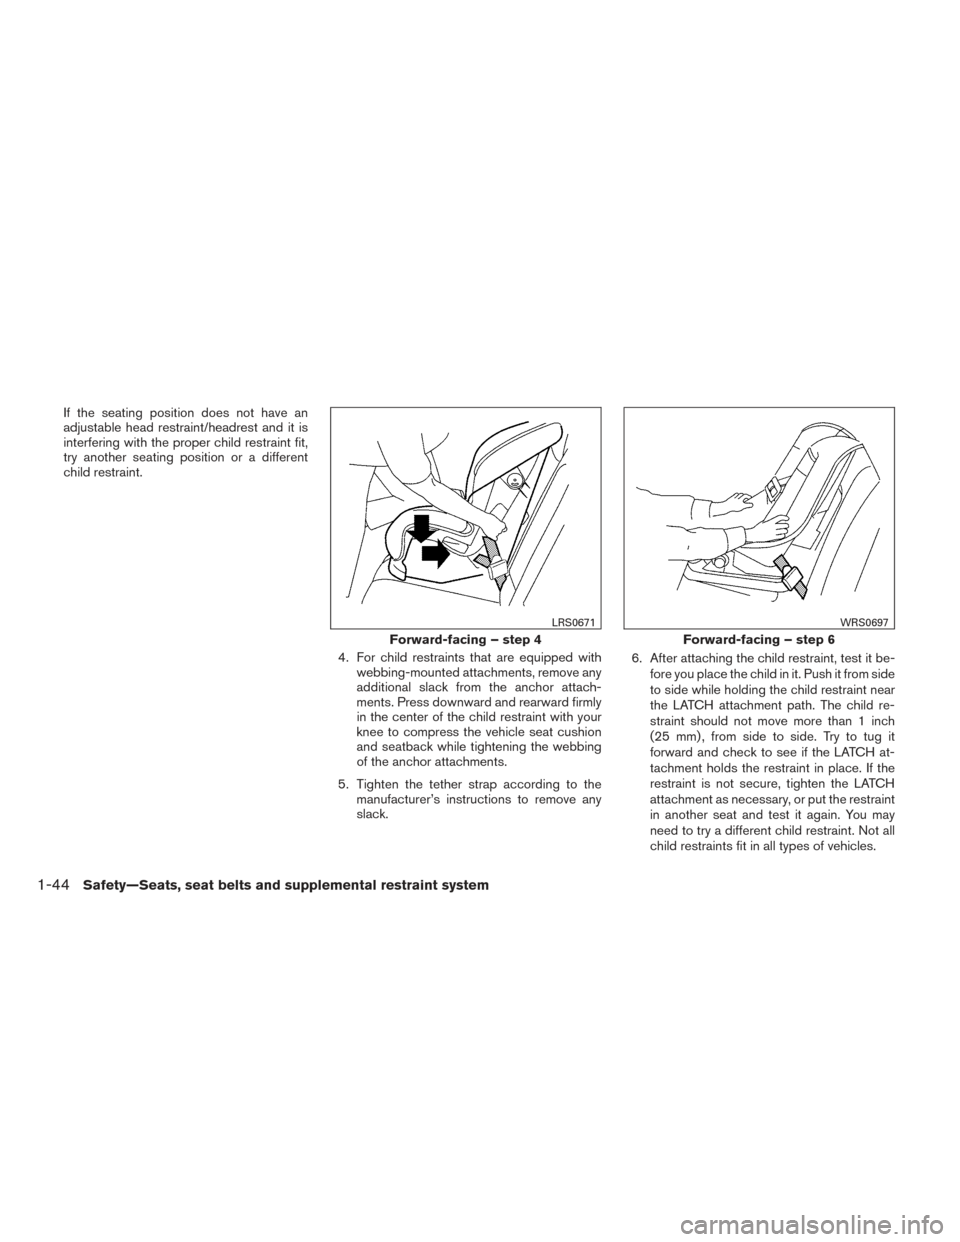 NISSAN PATHFINDER 2014 R52 / 4.G Repair Manual If the seating position does not have an
adjustable head restraint/headrest and it is
interfering with the proper child restraint fit,
try another seating position or a different
child restraint.4. Fo